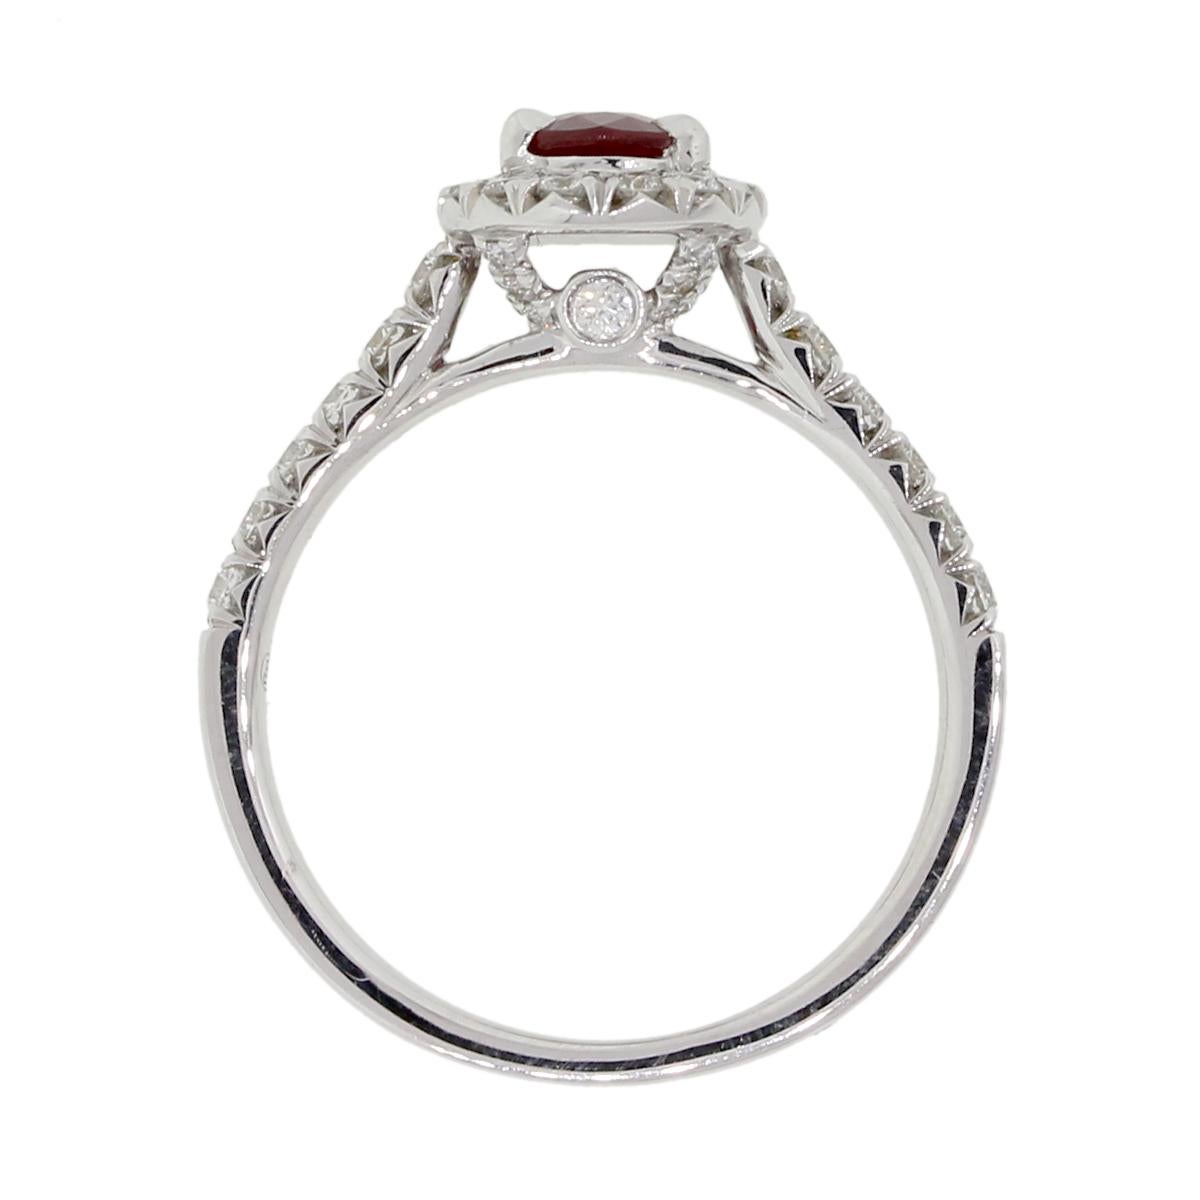 Material: 18k white gold
Gemstone Details: Approximately 0.69ct oval shape ruby.
Diamond Details: Approximately 0.49ctw of round brilliant diamonds. Diamonds are G/H in color and VS in clarity
Size: 6.5
Total Weight: 3.3g (2.1dwt)
Measurements: